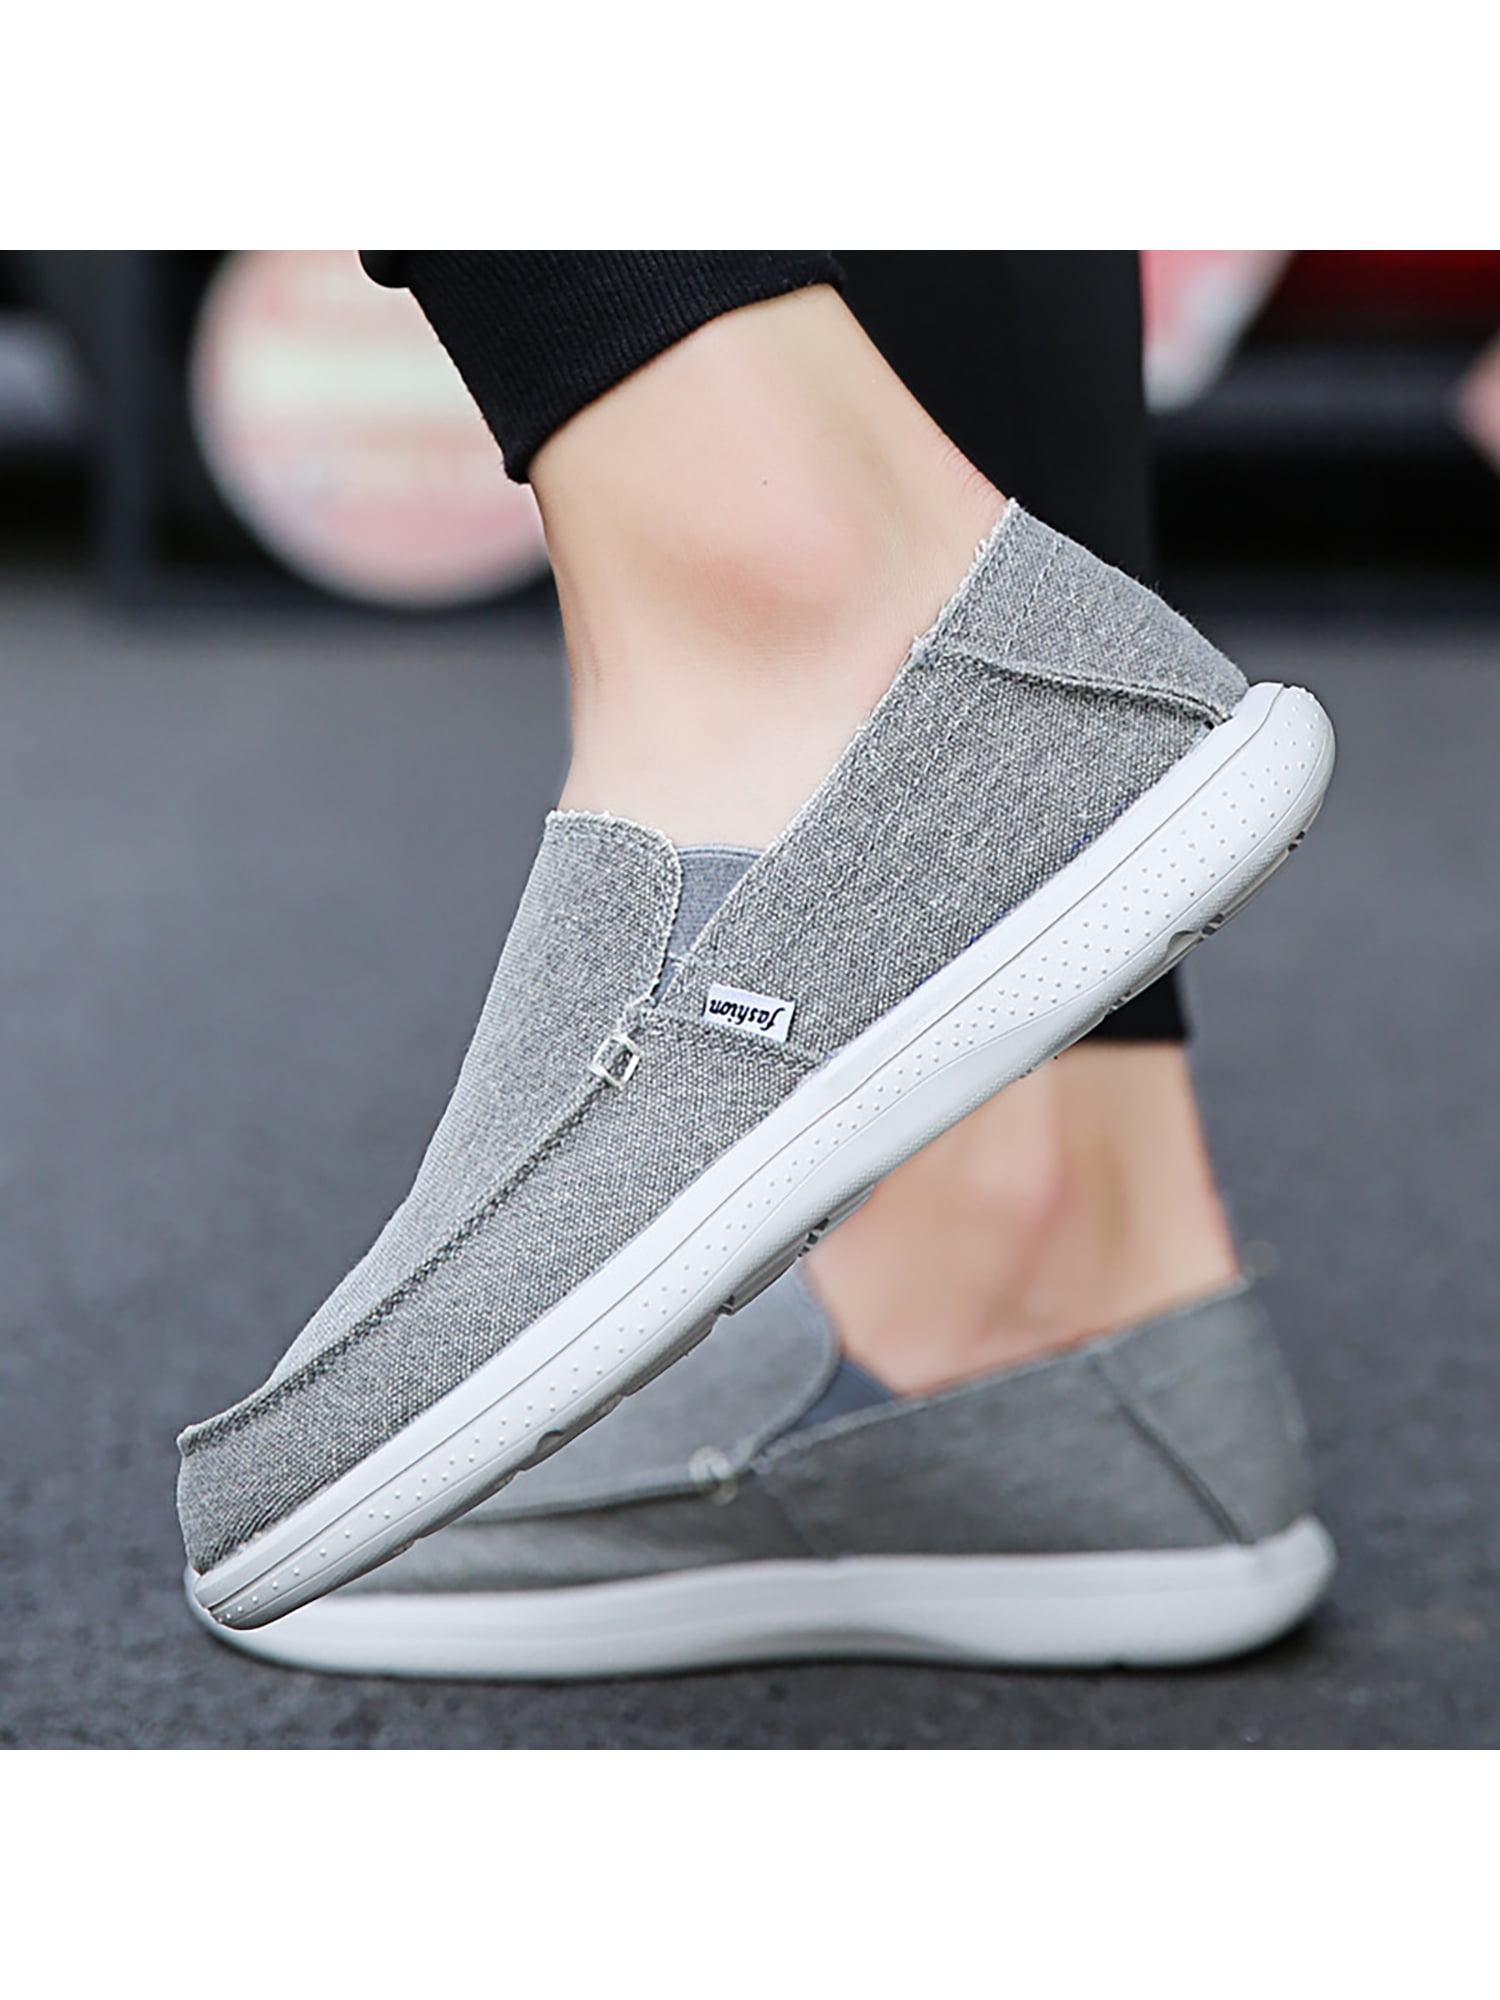 Mens Casual Slip On Loafers Canvas Boat Shoes Flats Sneakers Driving Moccasins